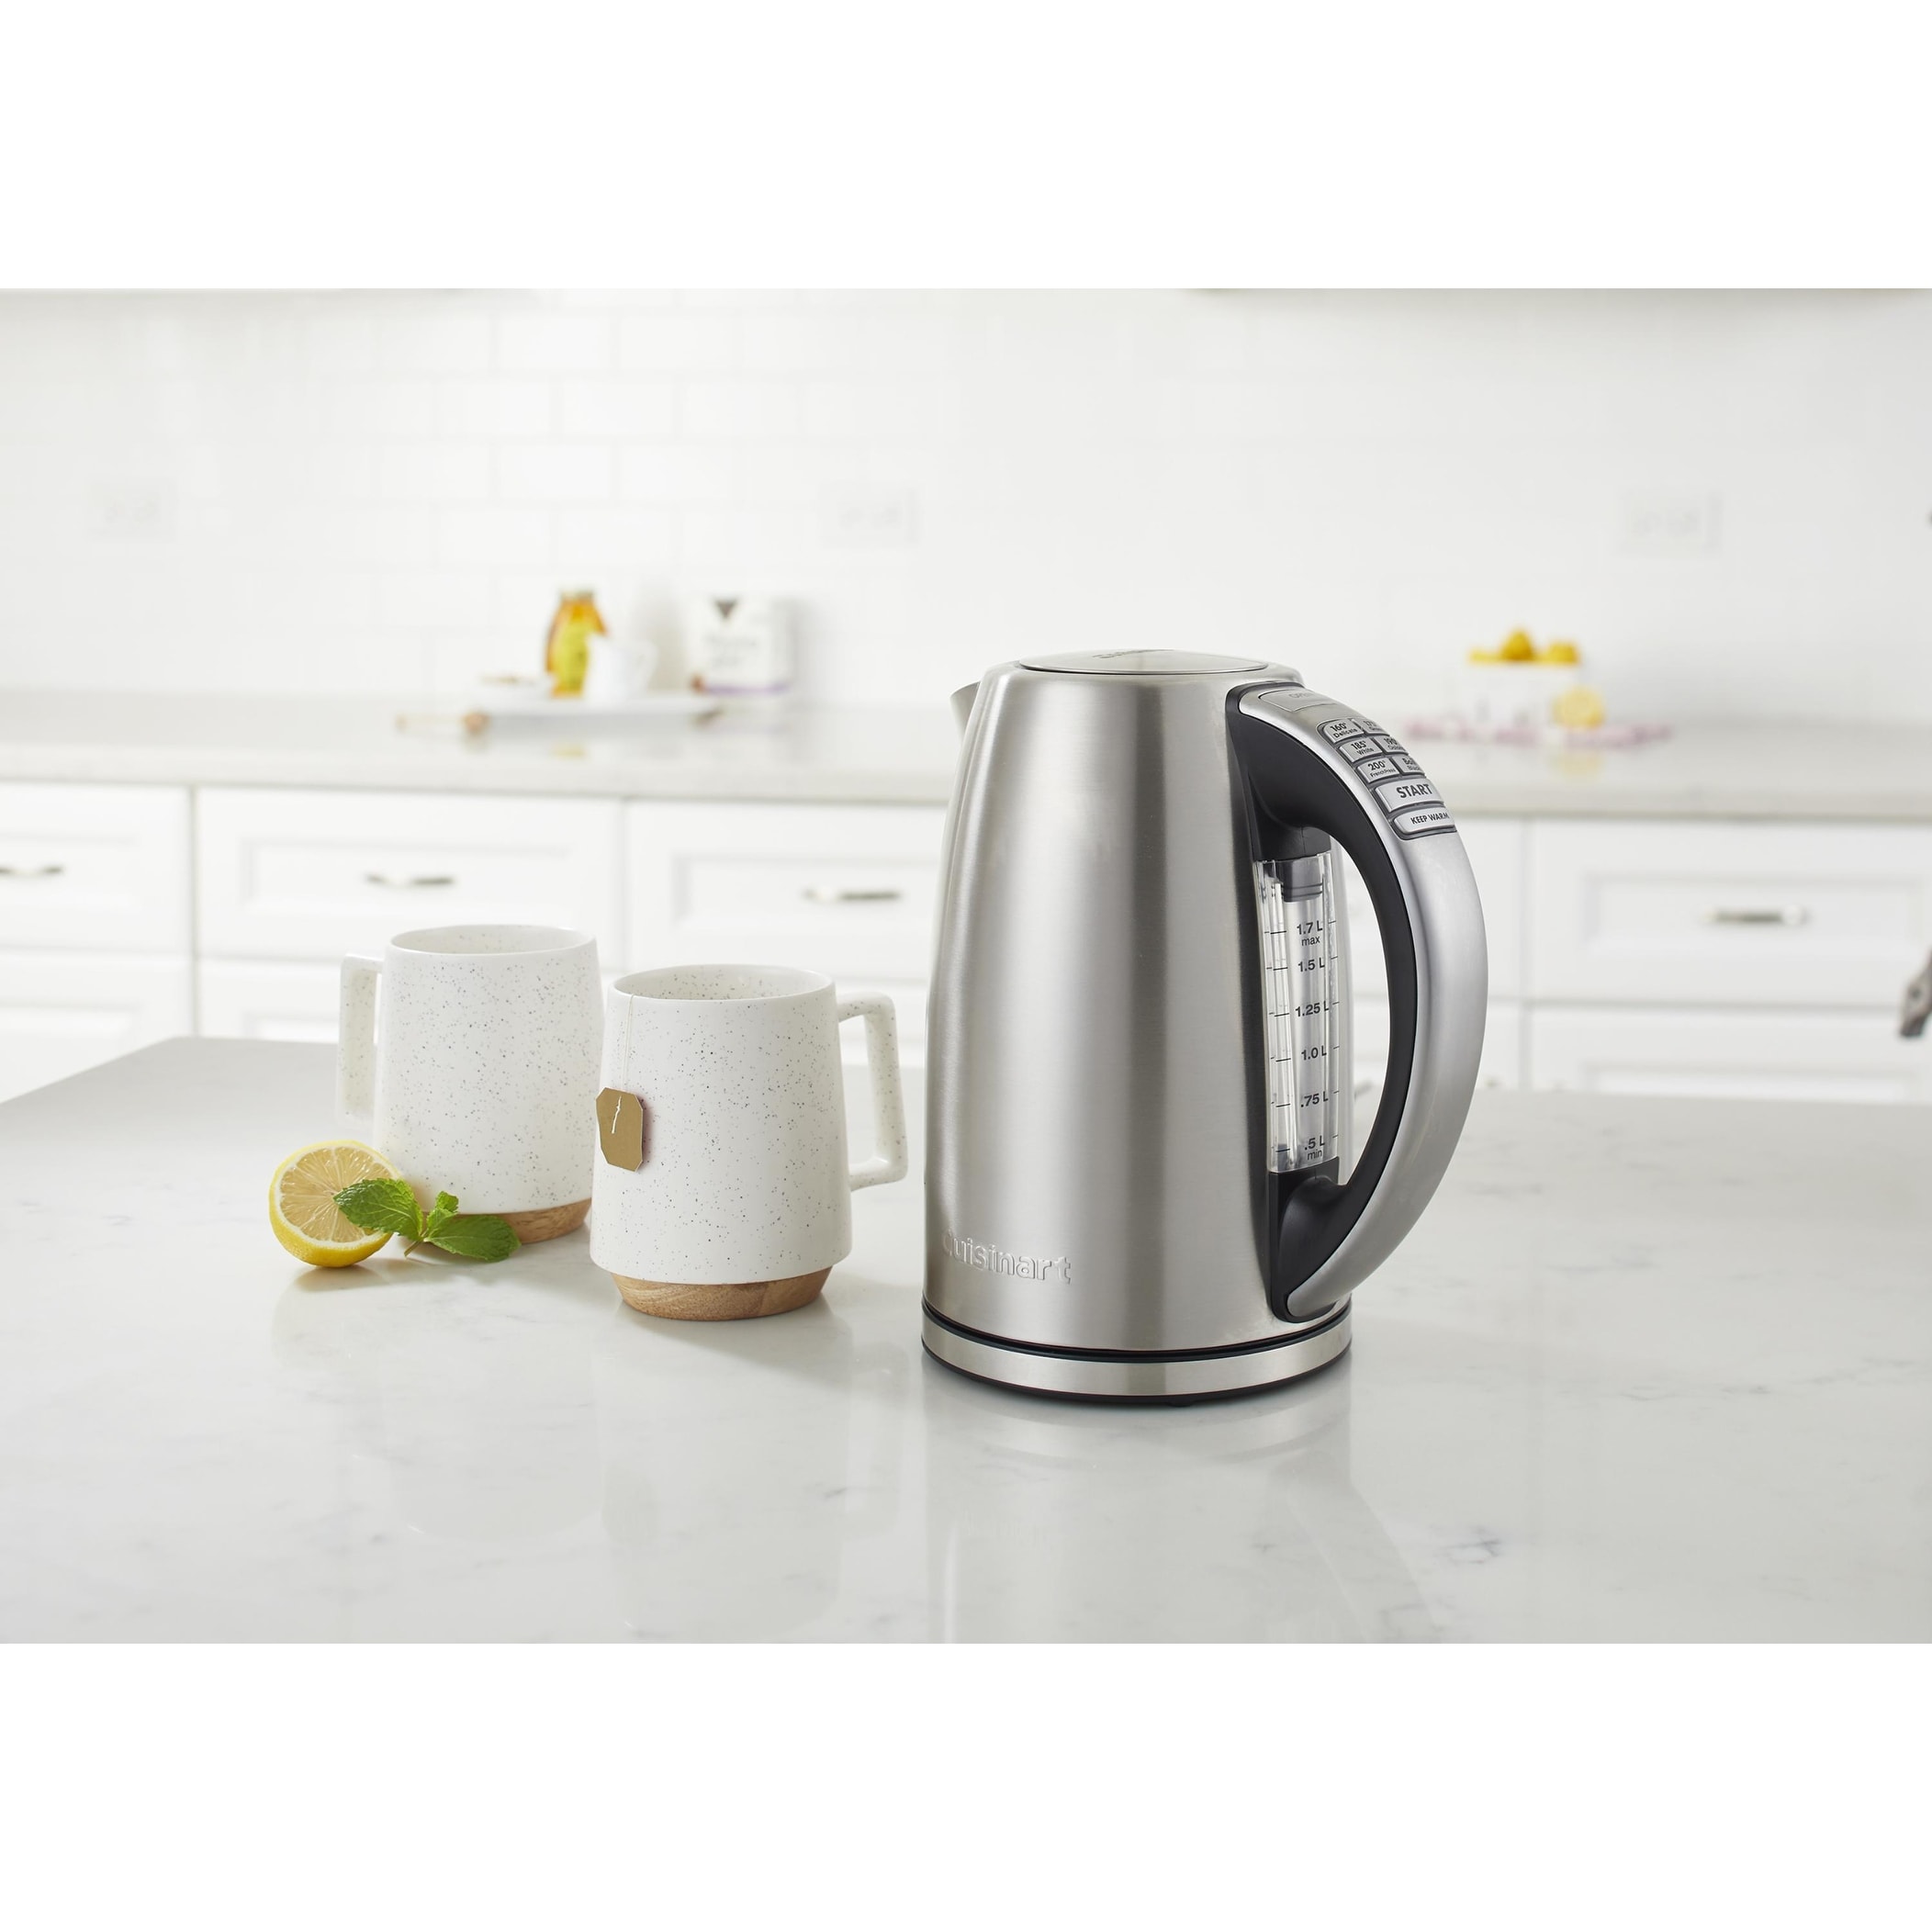 https://ak1.ostkcdn.com/images/products/is/images/direct/e7d69fe2db8d369b3d878998c05cb133dfc950ef/PerfecTemp%C2%AE-Cordless-Electric-Kettle.jpg